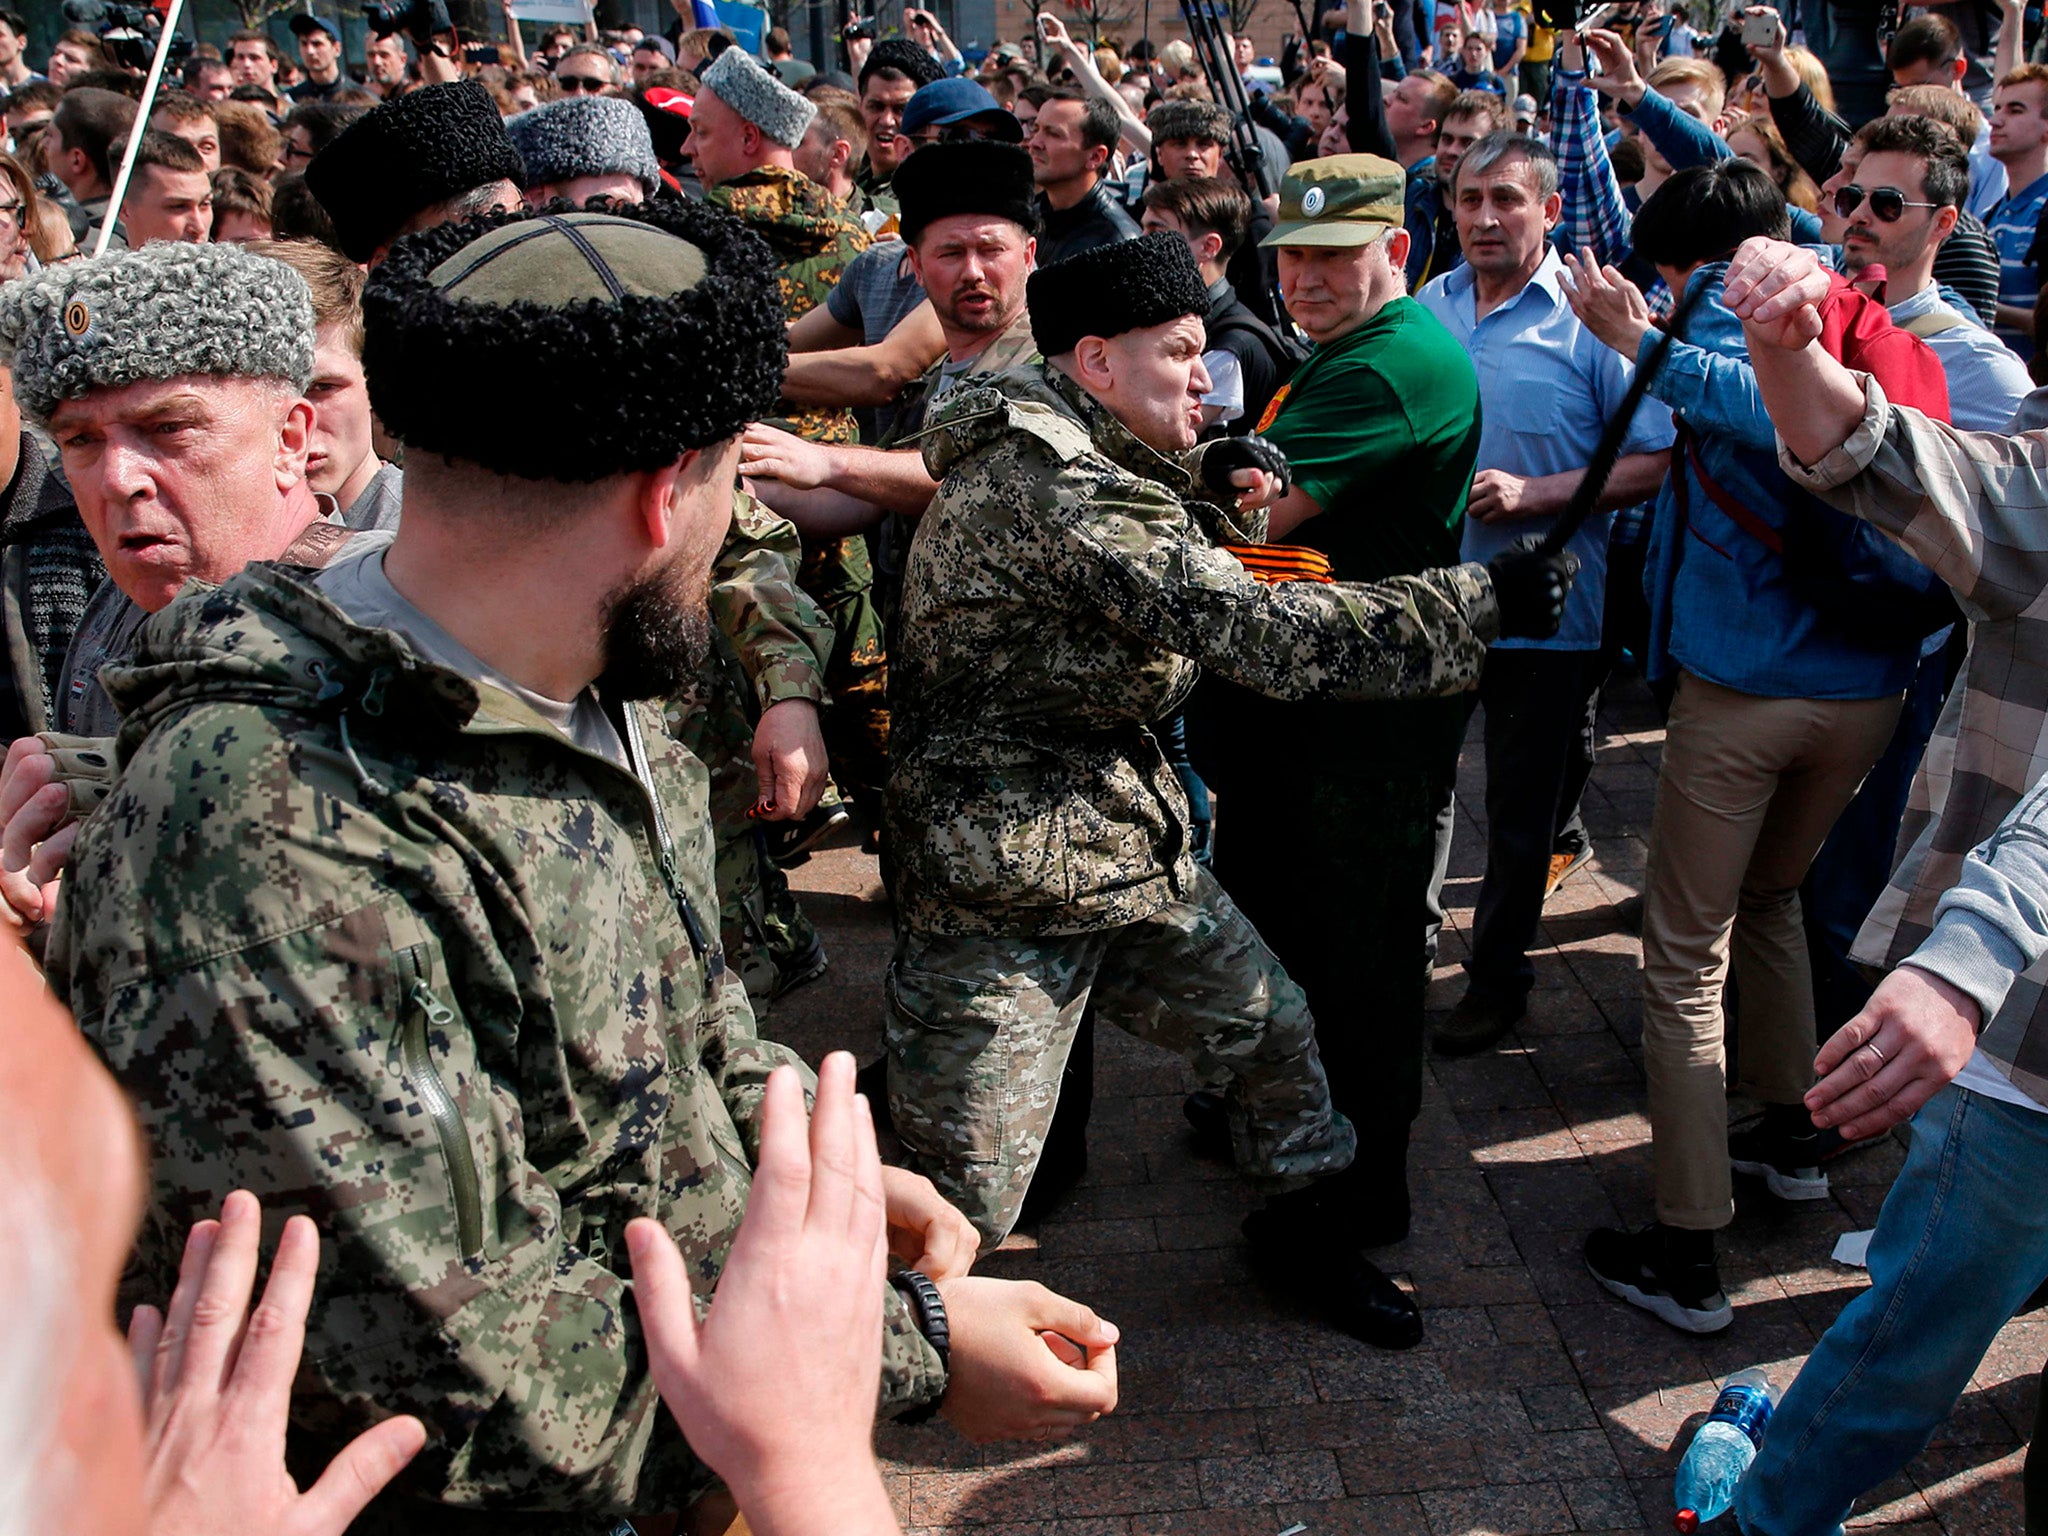 Cossacks scuffle with opposition supporters in Moscow during an unauthorised anti-Putin rally called by opposition leader Alexei Navalny earlier this month